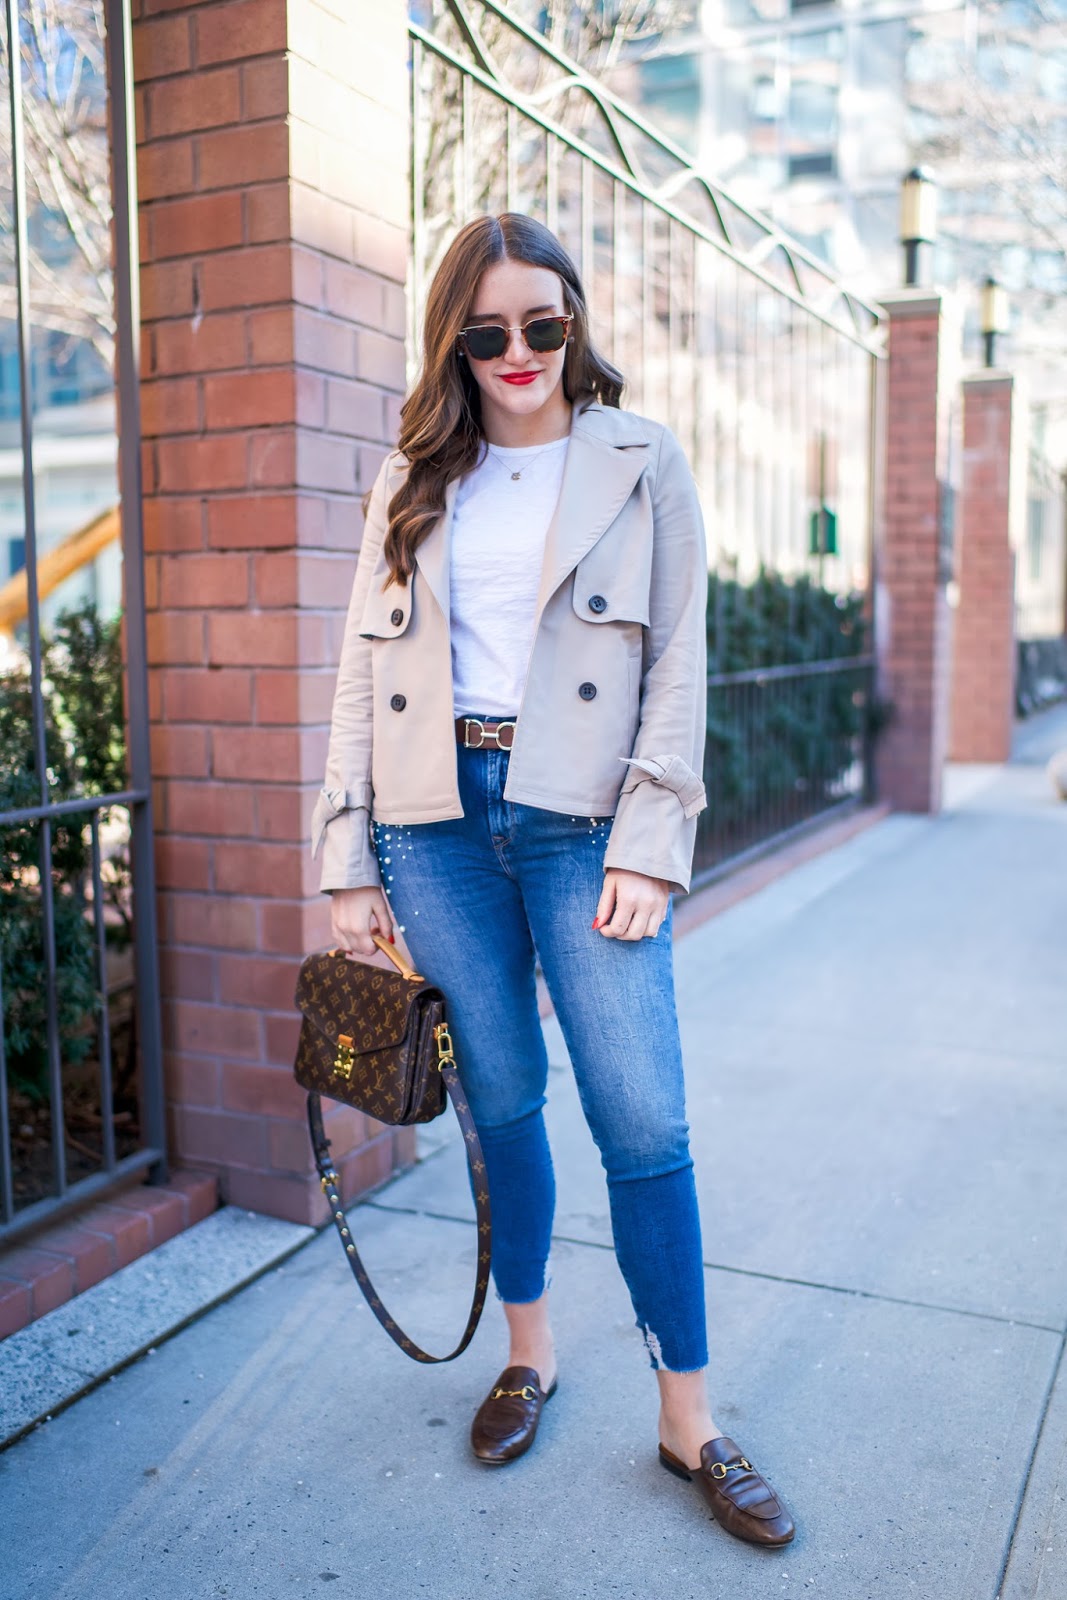 Cute Outfit by popular New York style blogger Covering the Bases